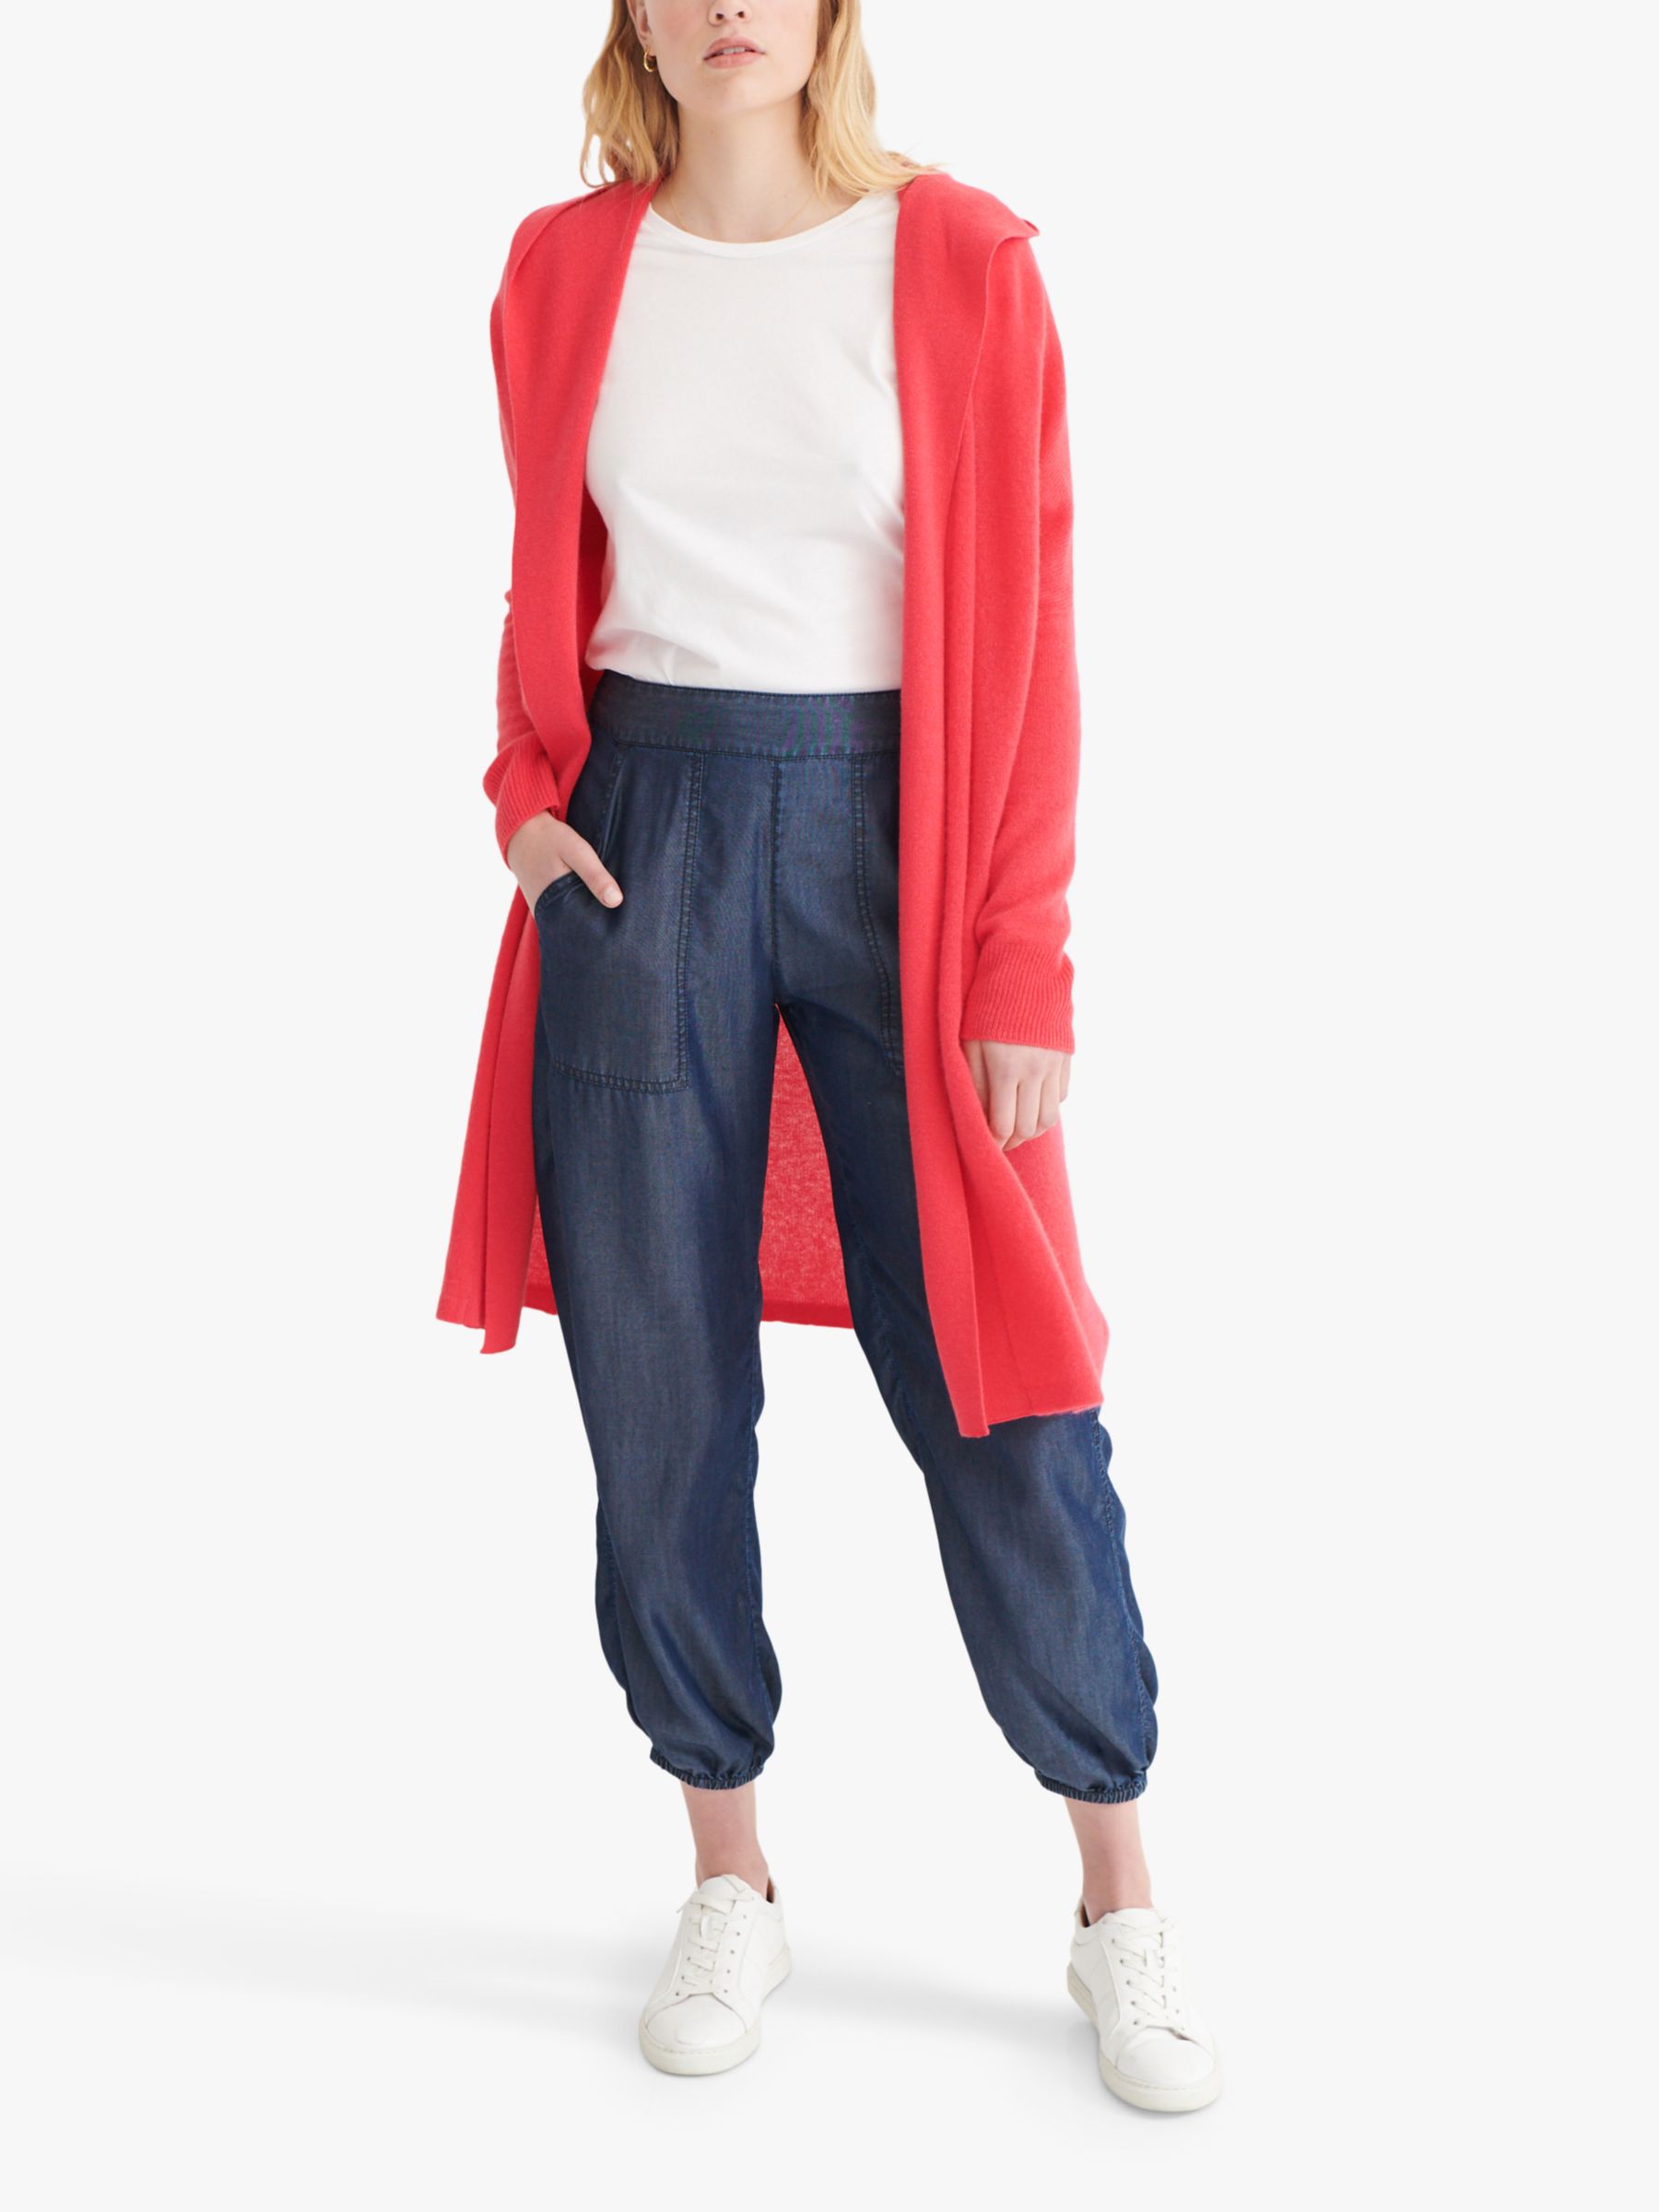 NRBY Suzie Cashmere Hooded Cardigan Coat, Coral at John Lewis & Partners